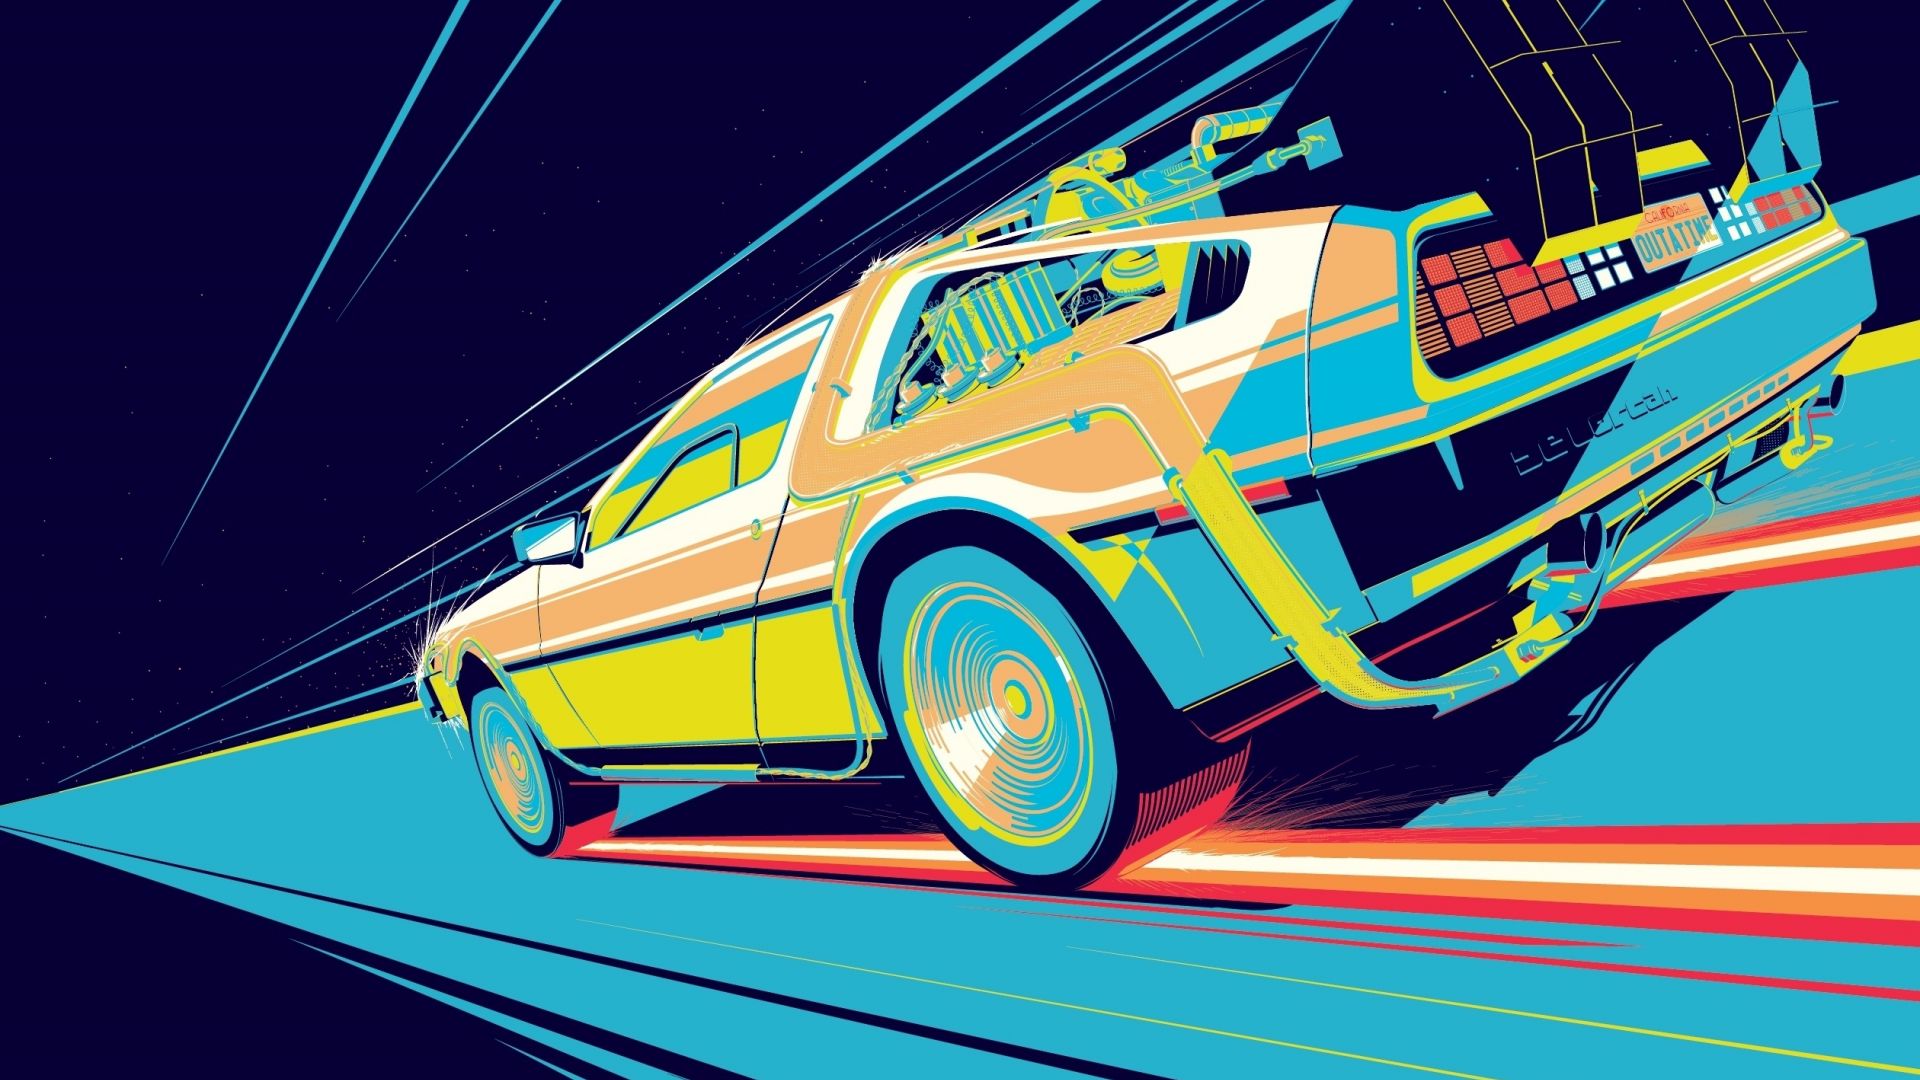 Back to the future HD wallpaper, HD image, background